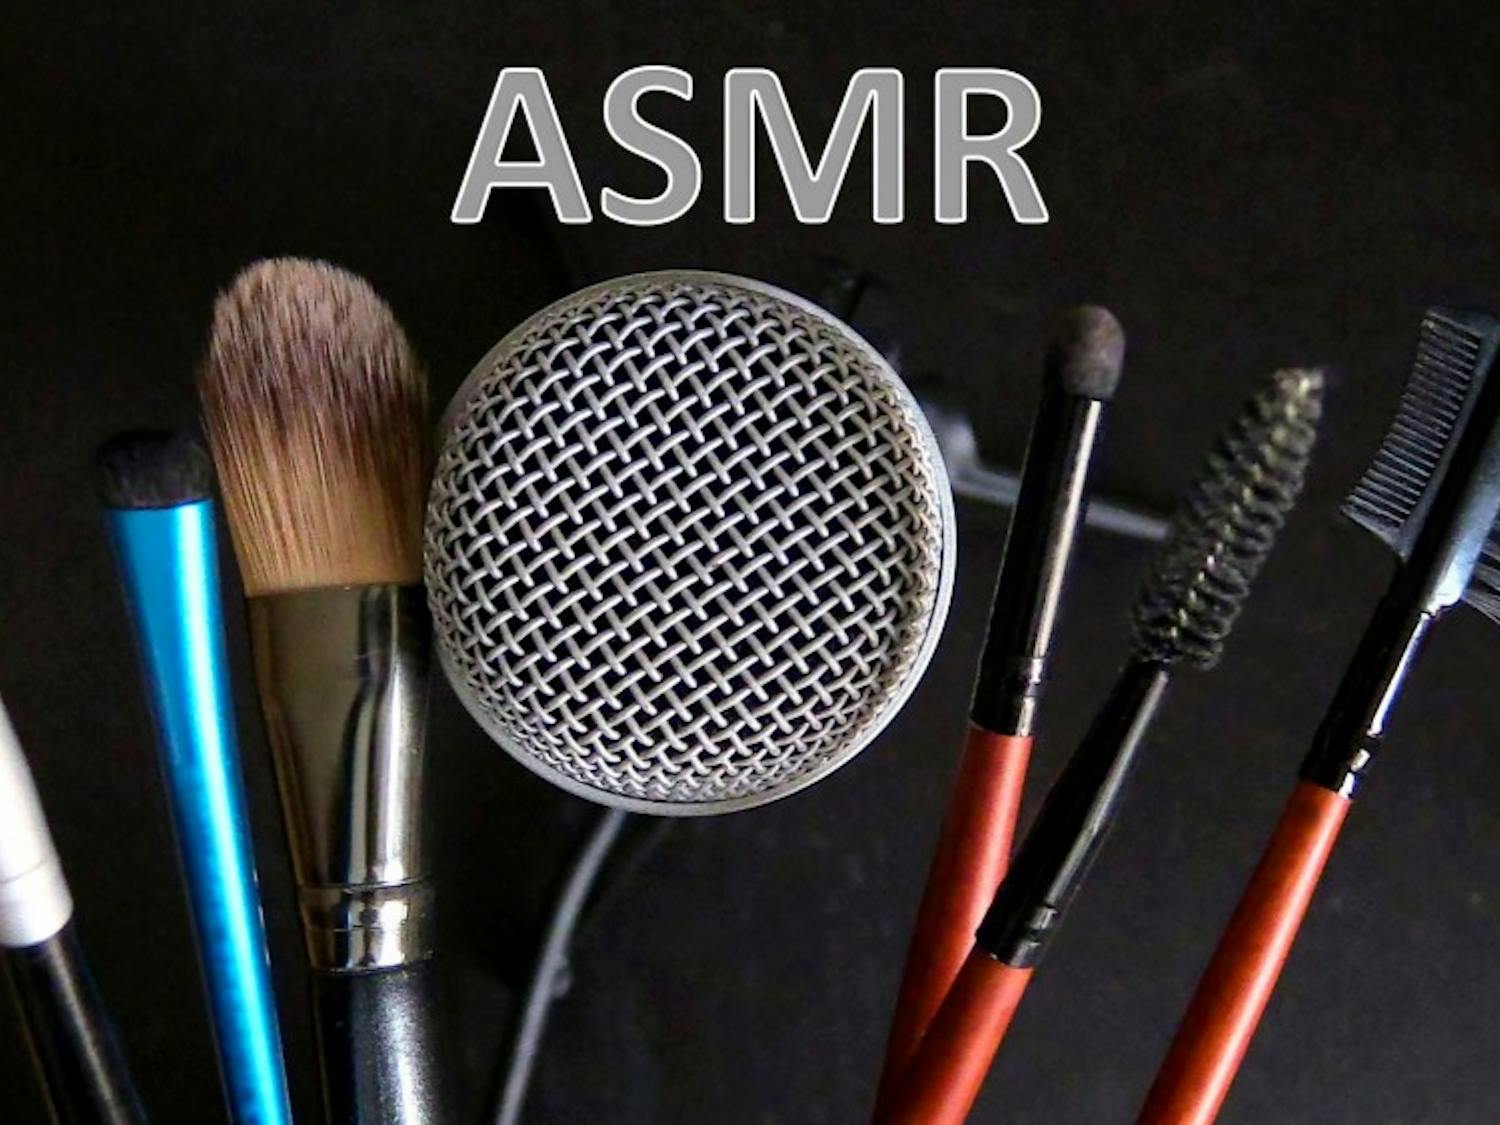 ASMR YouTube videos feature everyday things like brushes, boxes and gum-chewing to relax their viewers. Photo by YouTube channel Olinya.